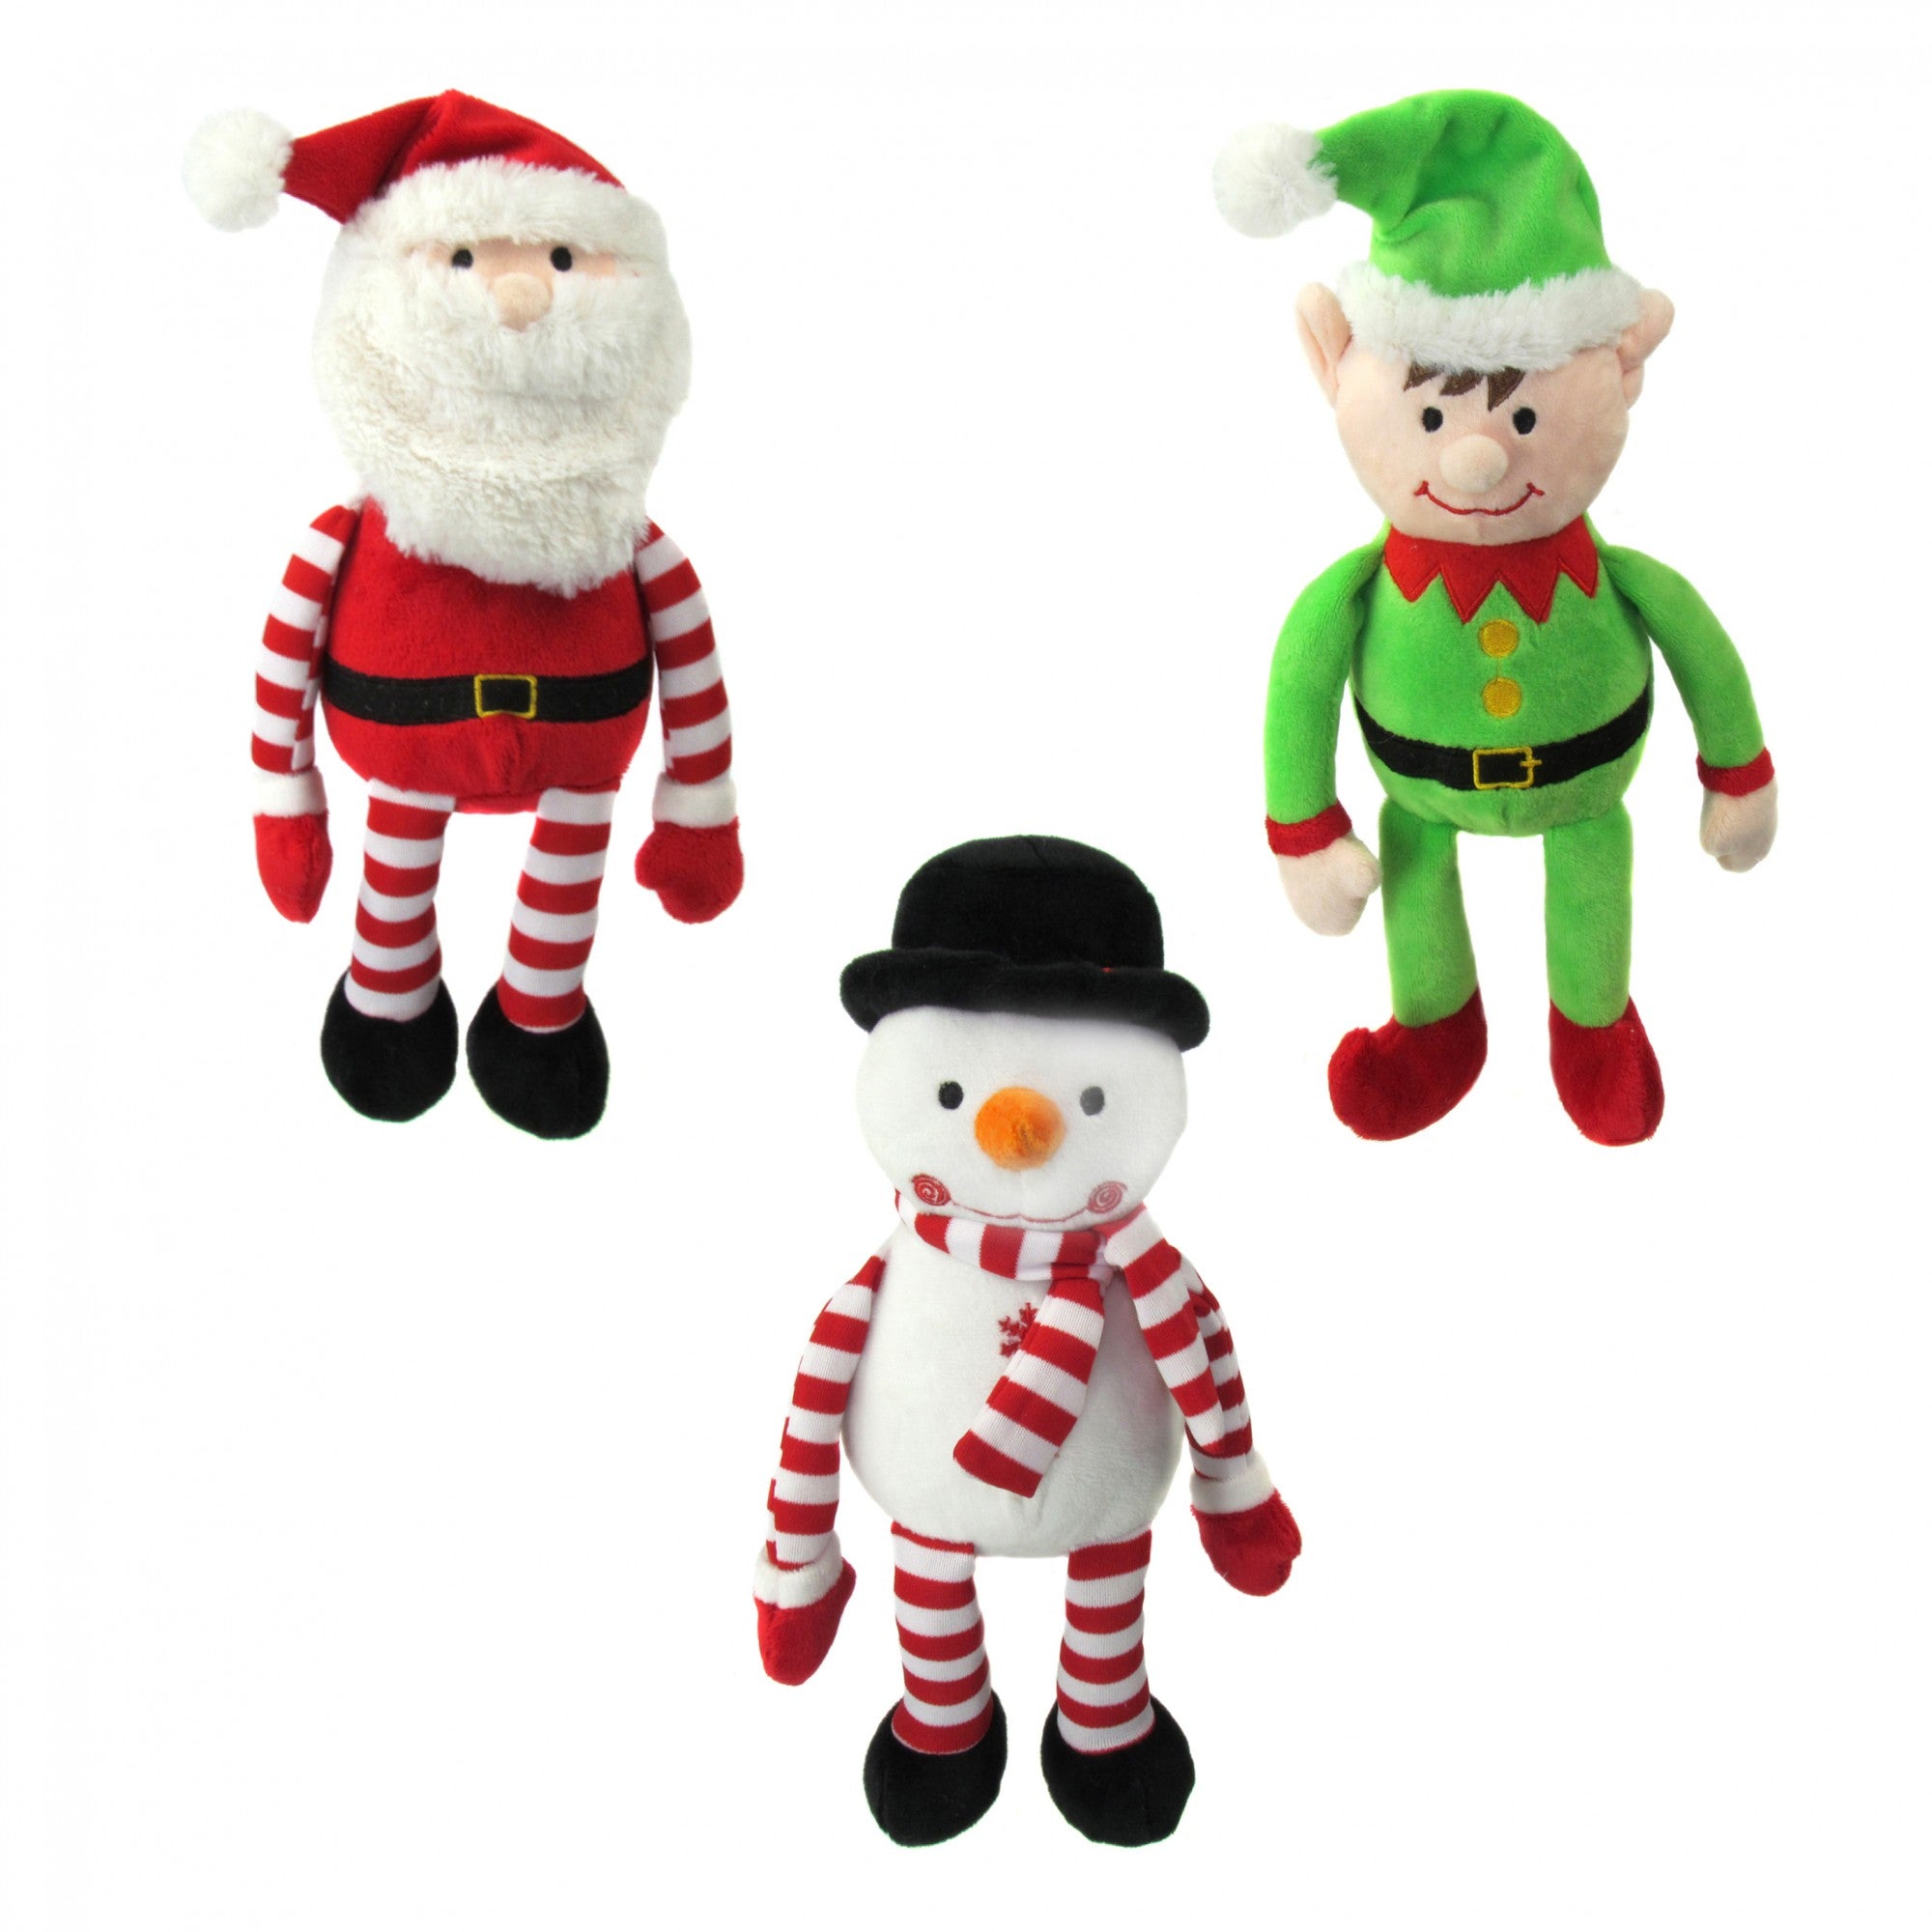 View Christmas Sitting Plush Toys assorted design information